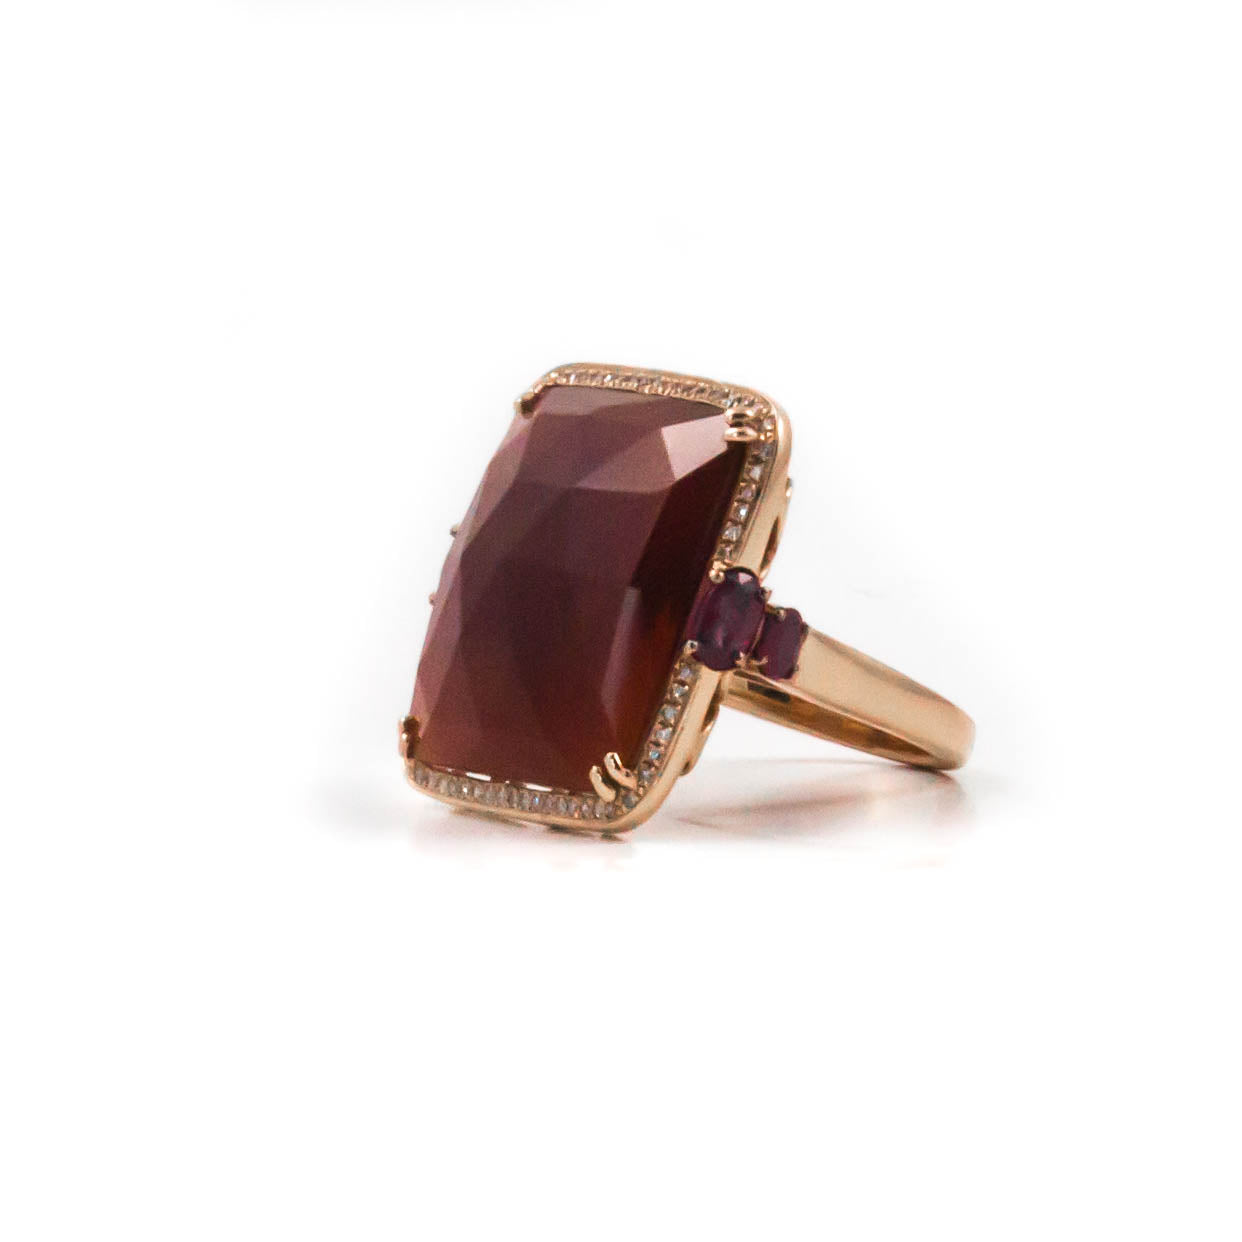 Carnelian Agate Cocktail Ring